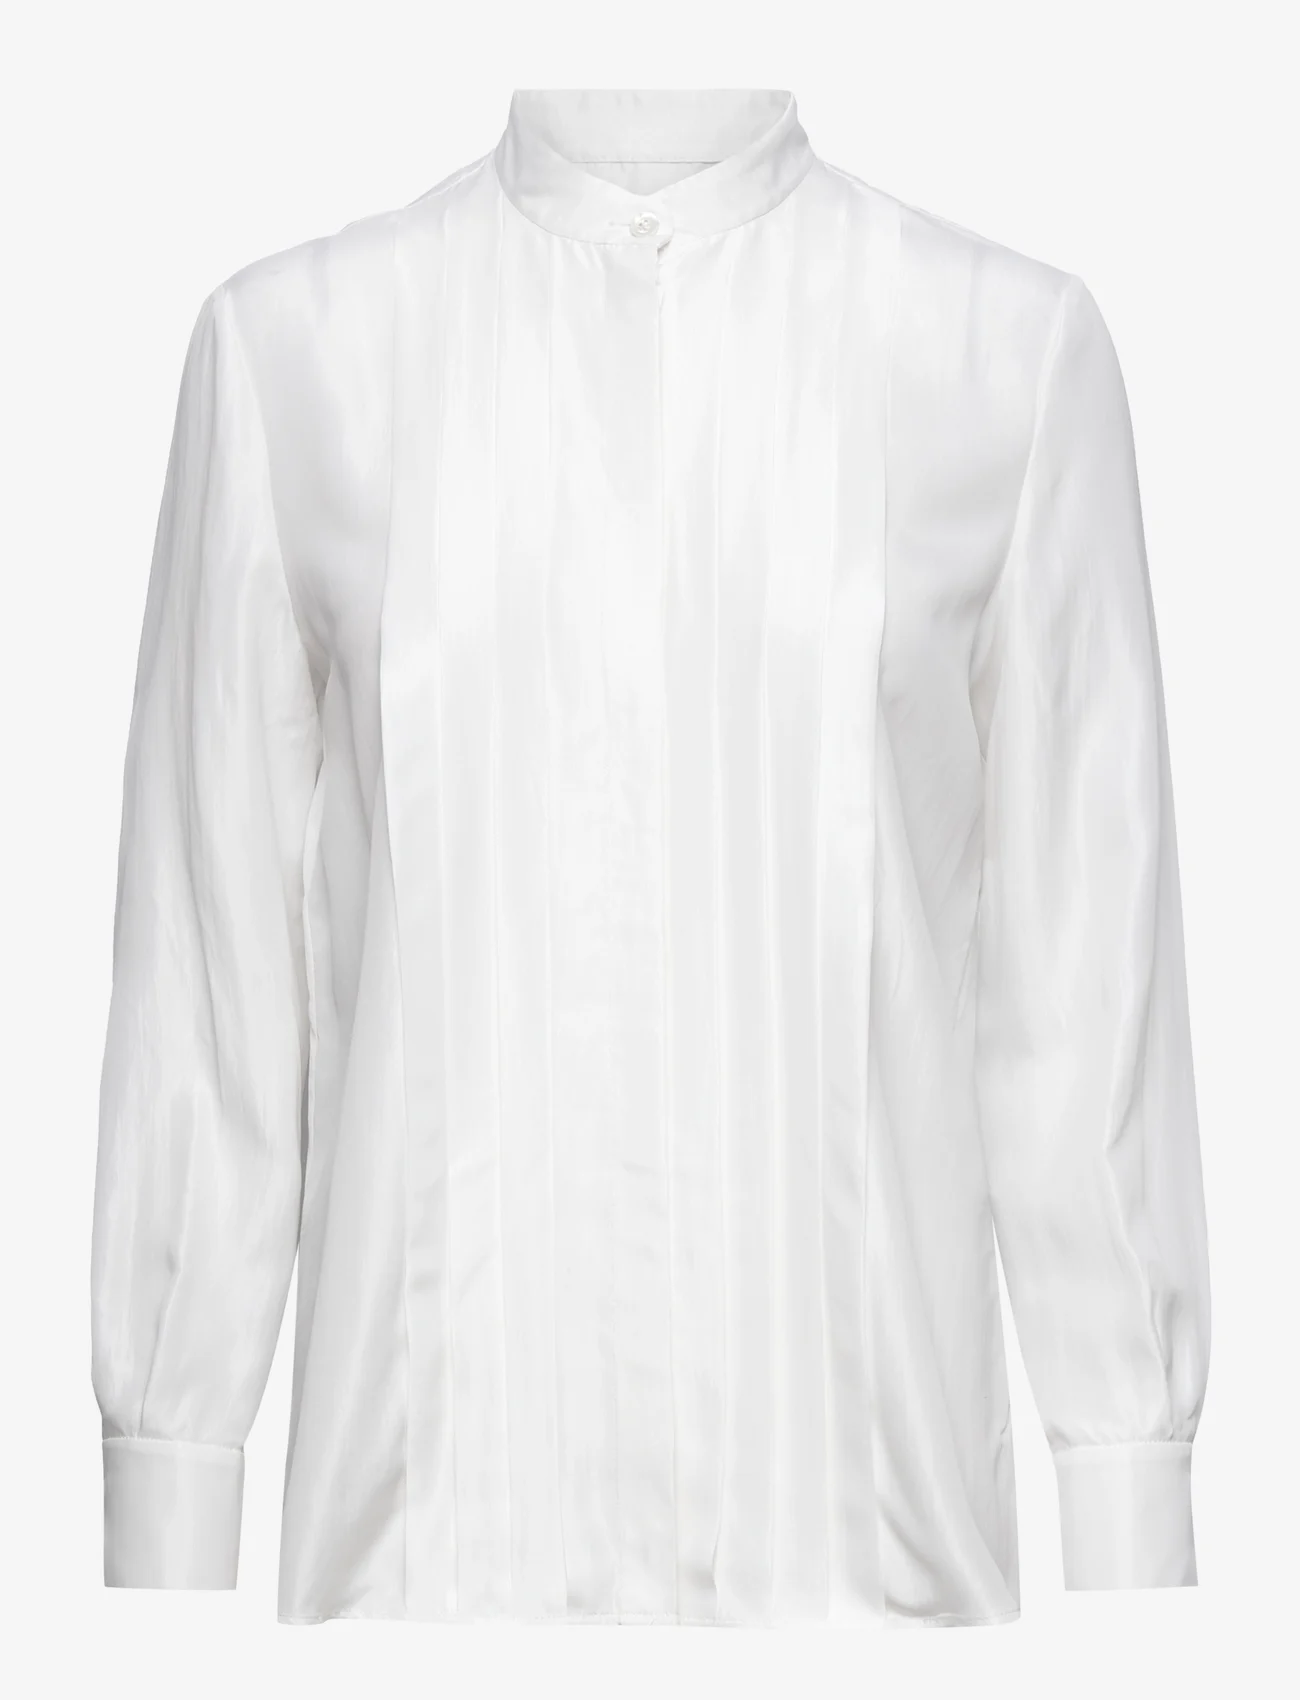 Boutique Moschino - Blouse - long-sleeved shirts - white - 0